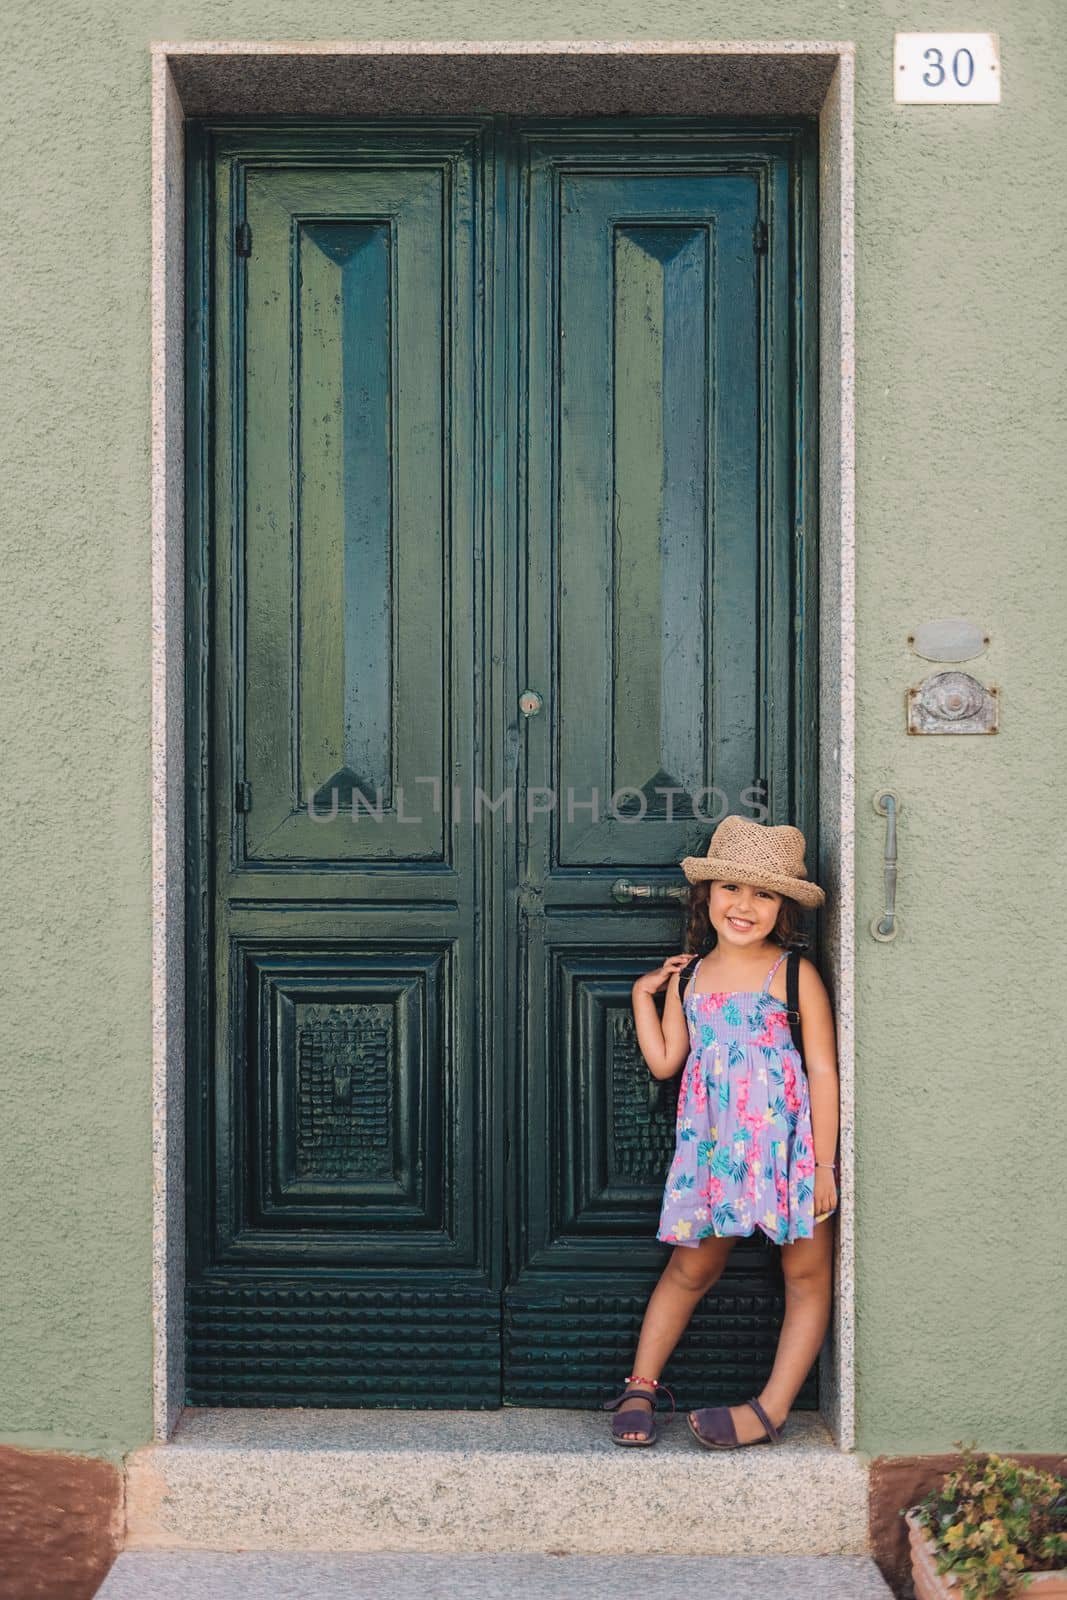 Little girl poses smiling in front of a green door by raulmelldo